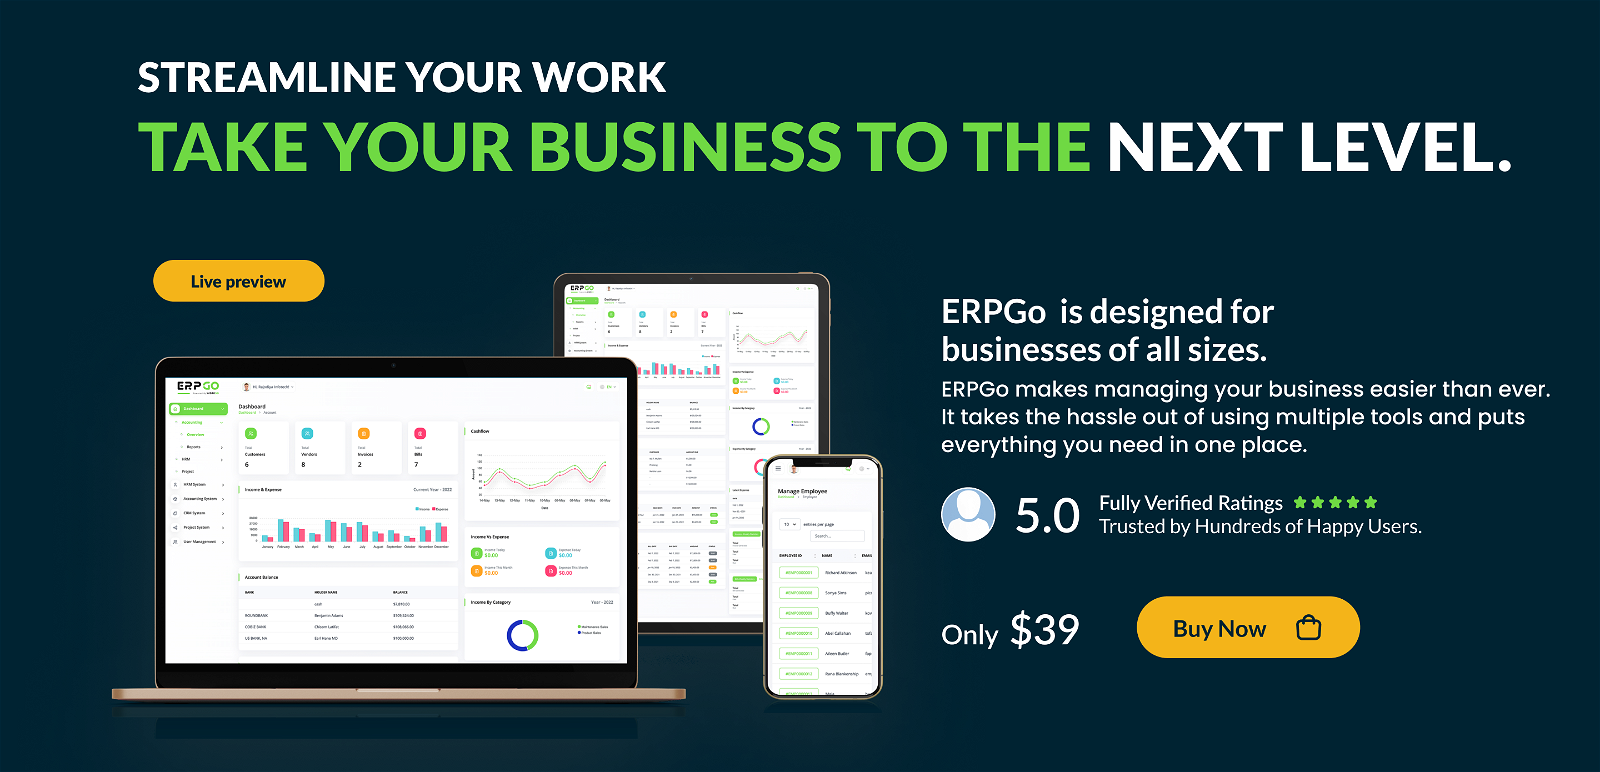 ERPGo - All In One Business ERP With Project, Account, HRM & CRM - 4